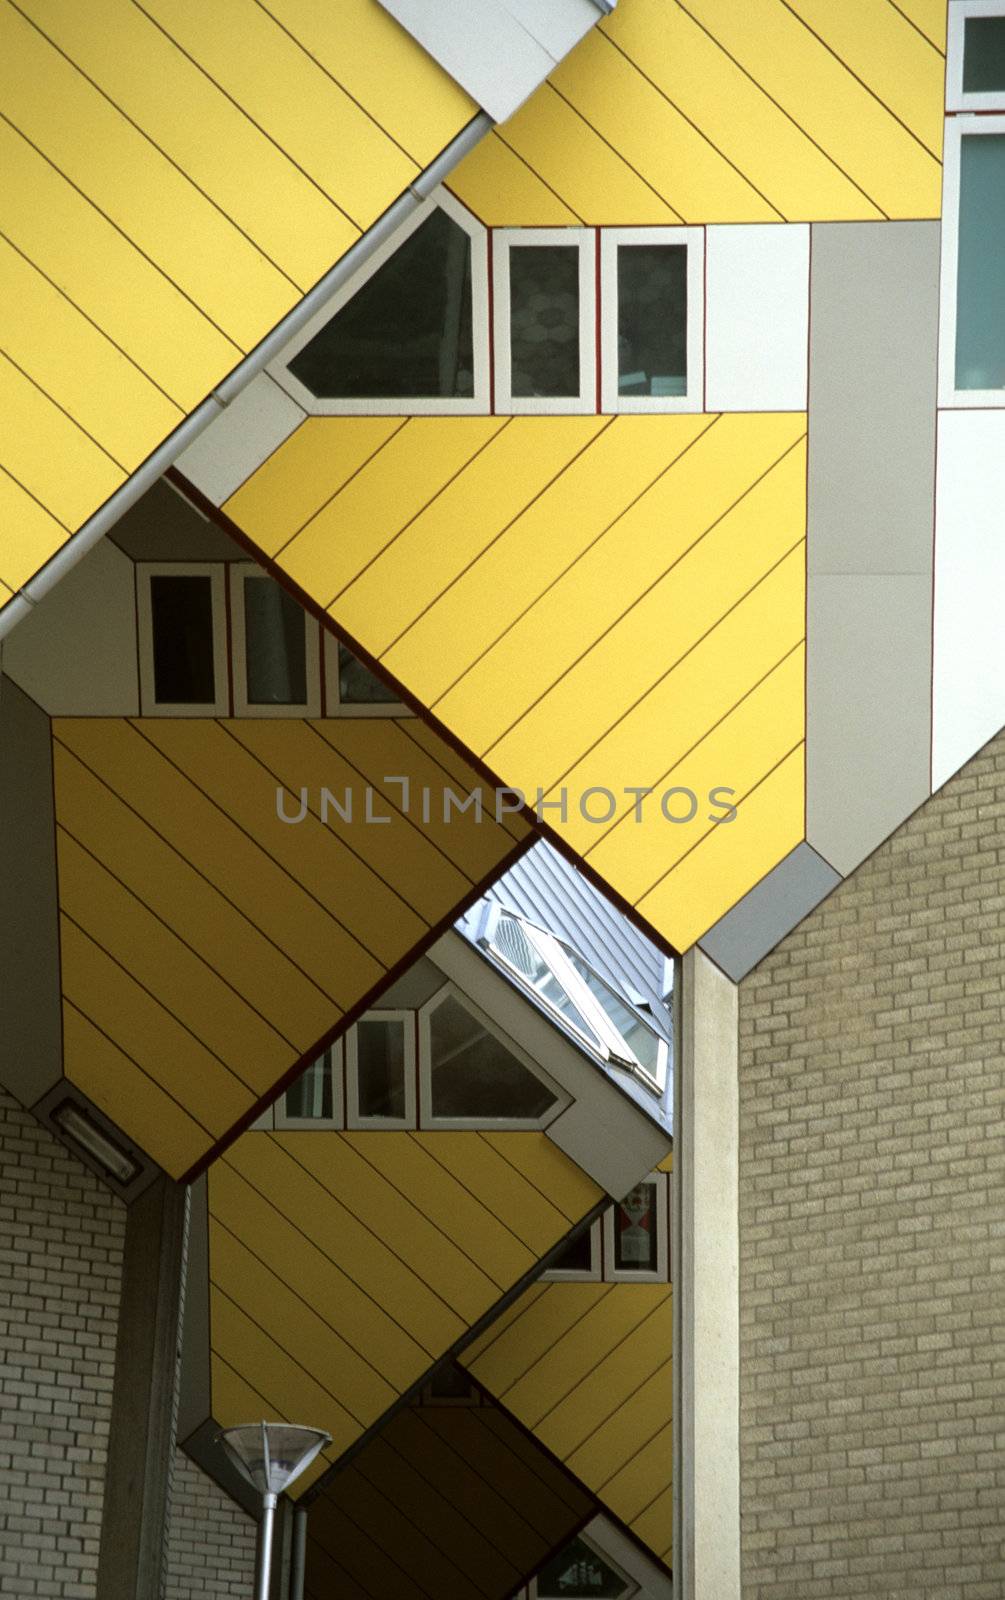 A Close up of the famous Cube Houses in Rotterdam, the Netherlands.